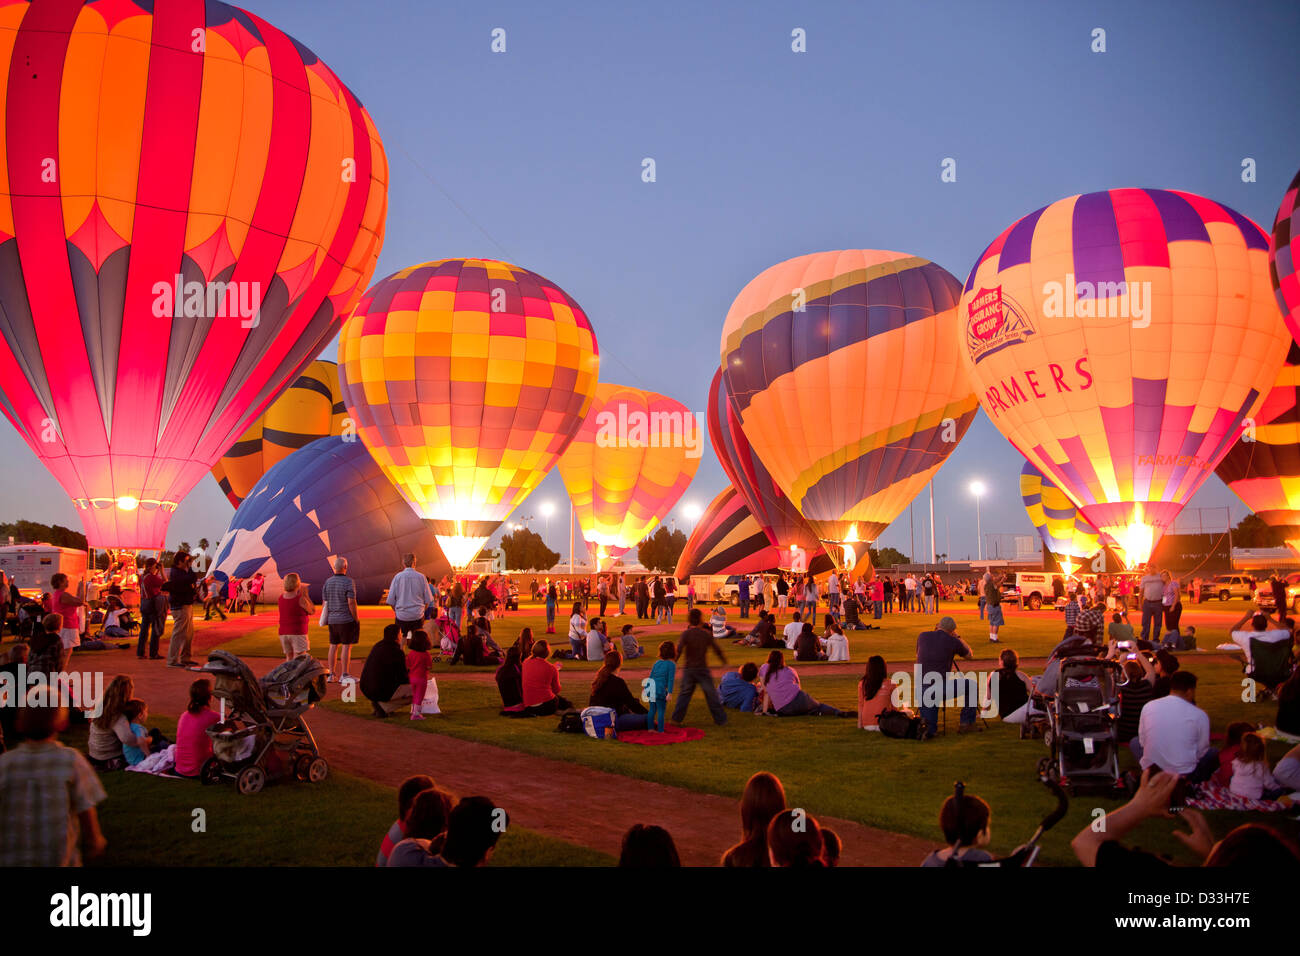 Hot Air Balloons glowing in the dark at t he Yuma Balloon Festival in